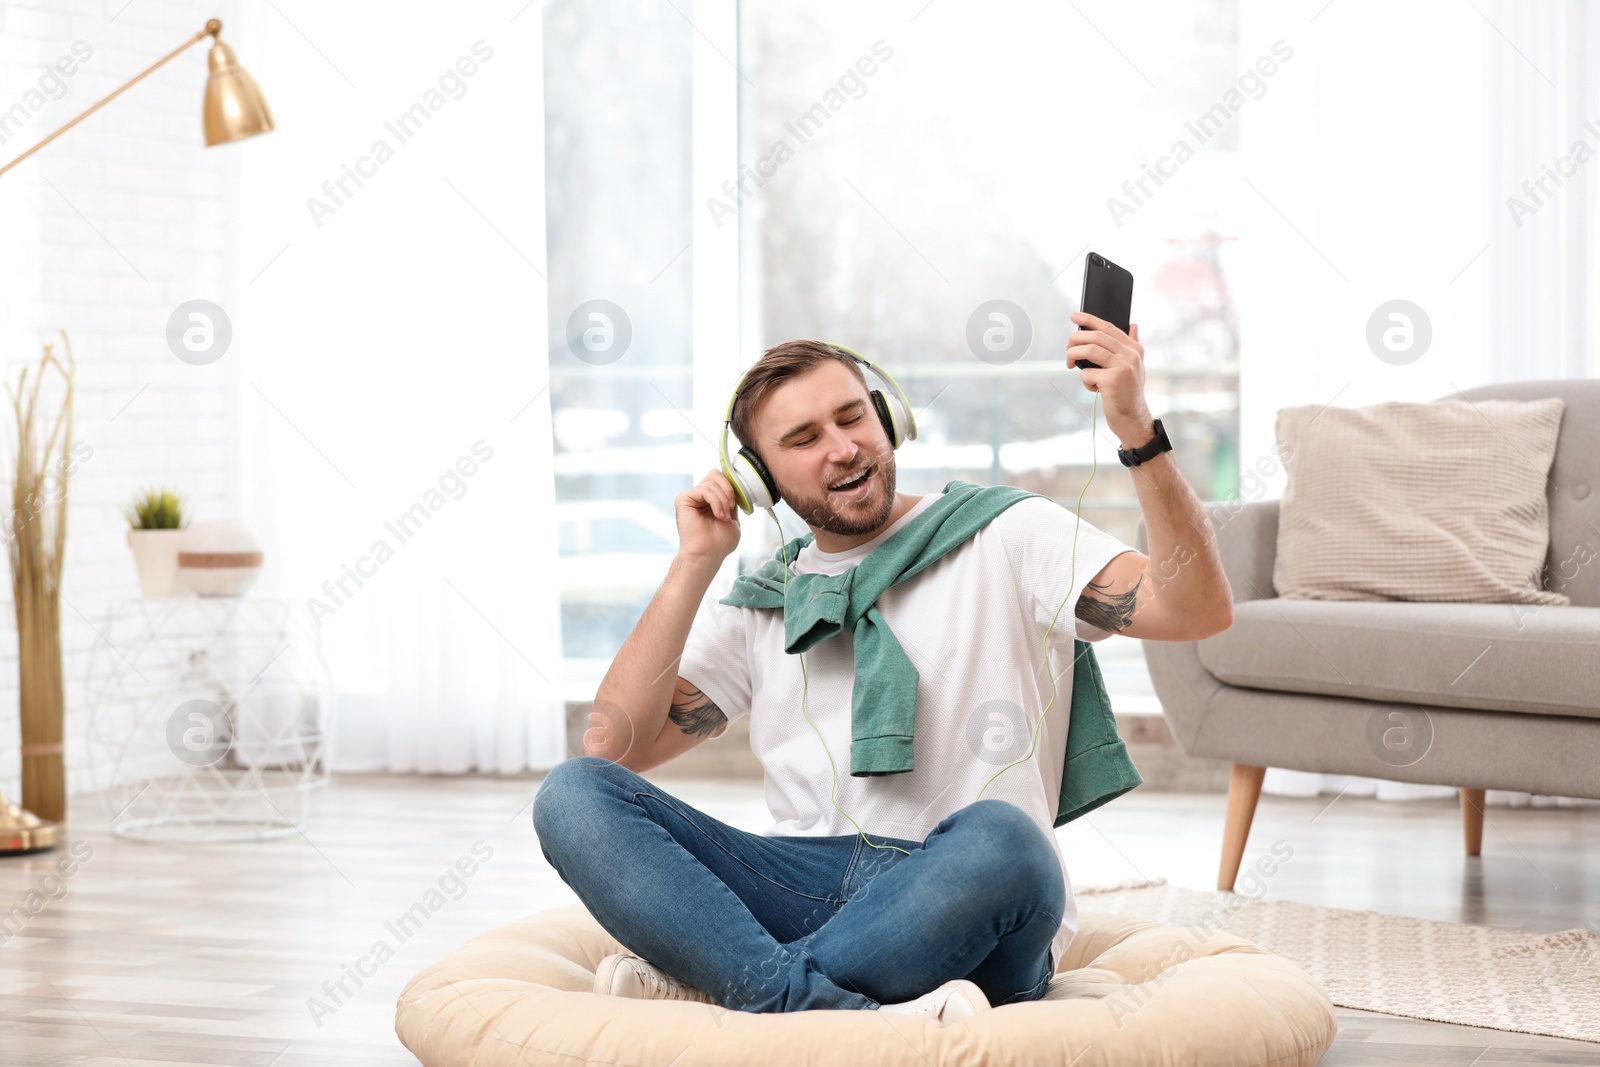 Photo of Young man with headphones and mobile device enjoying music on floor in living room